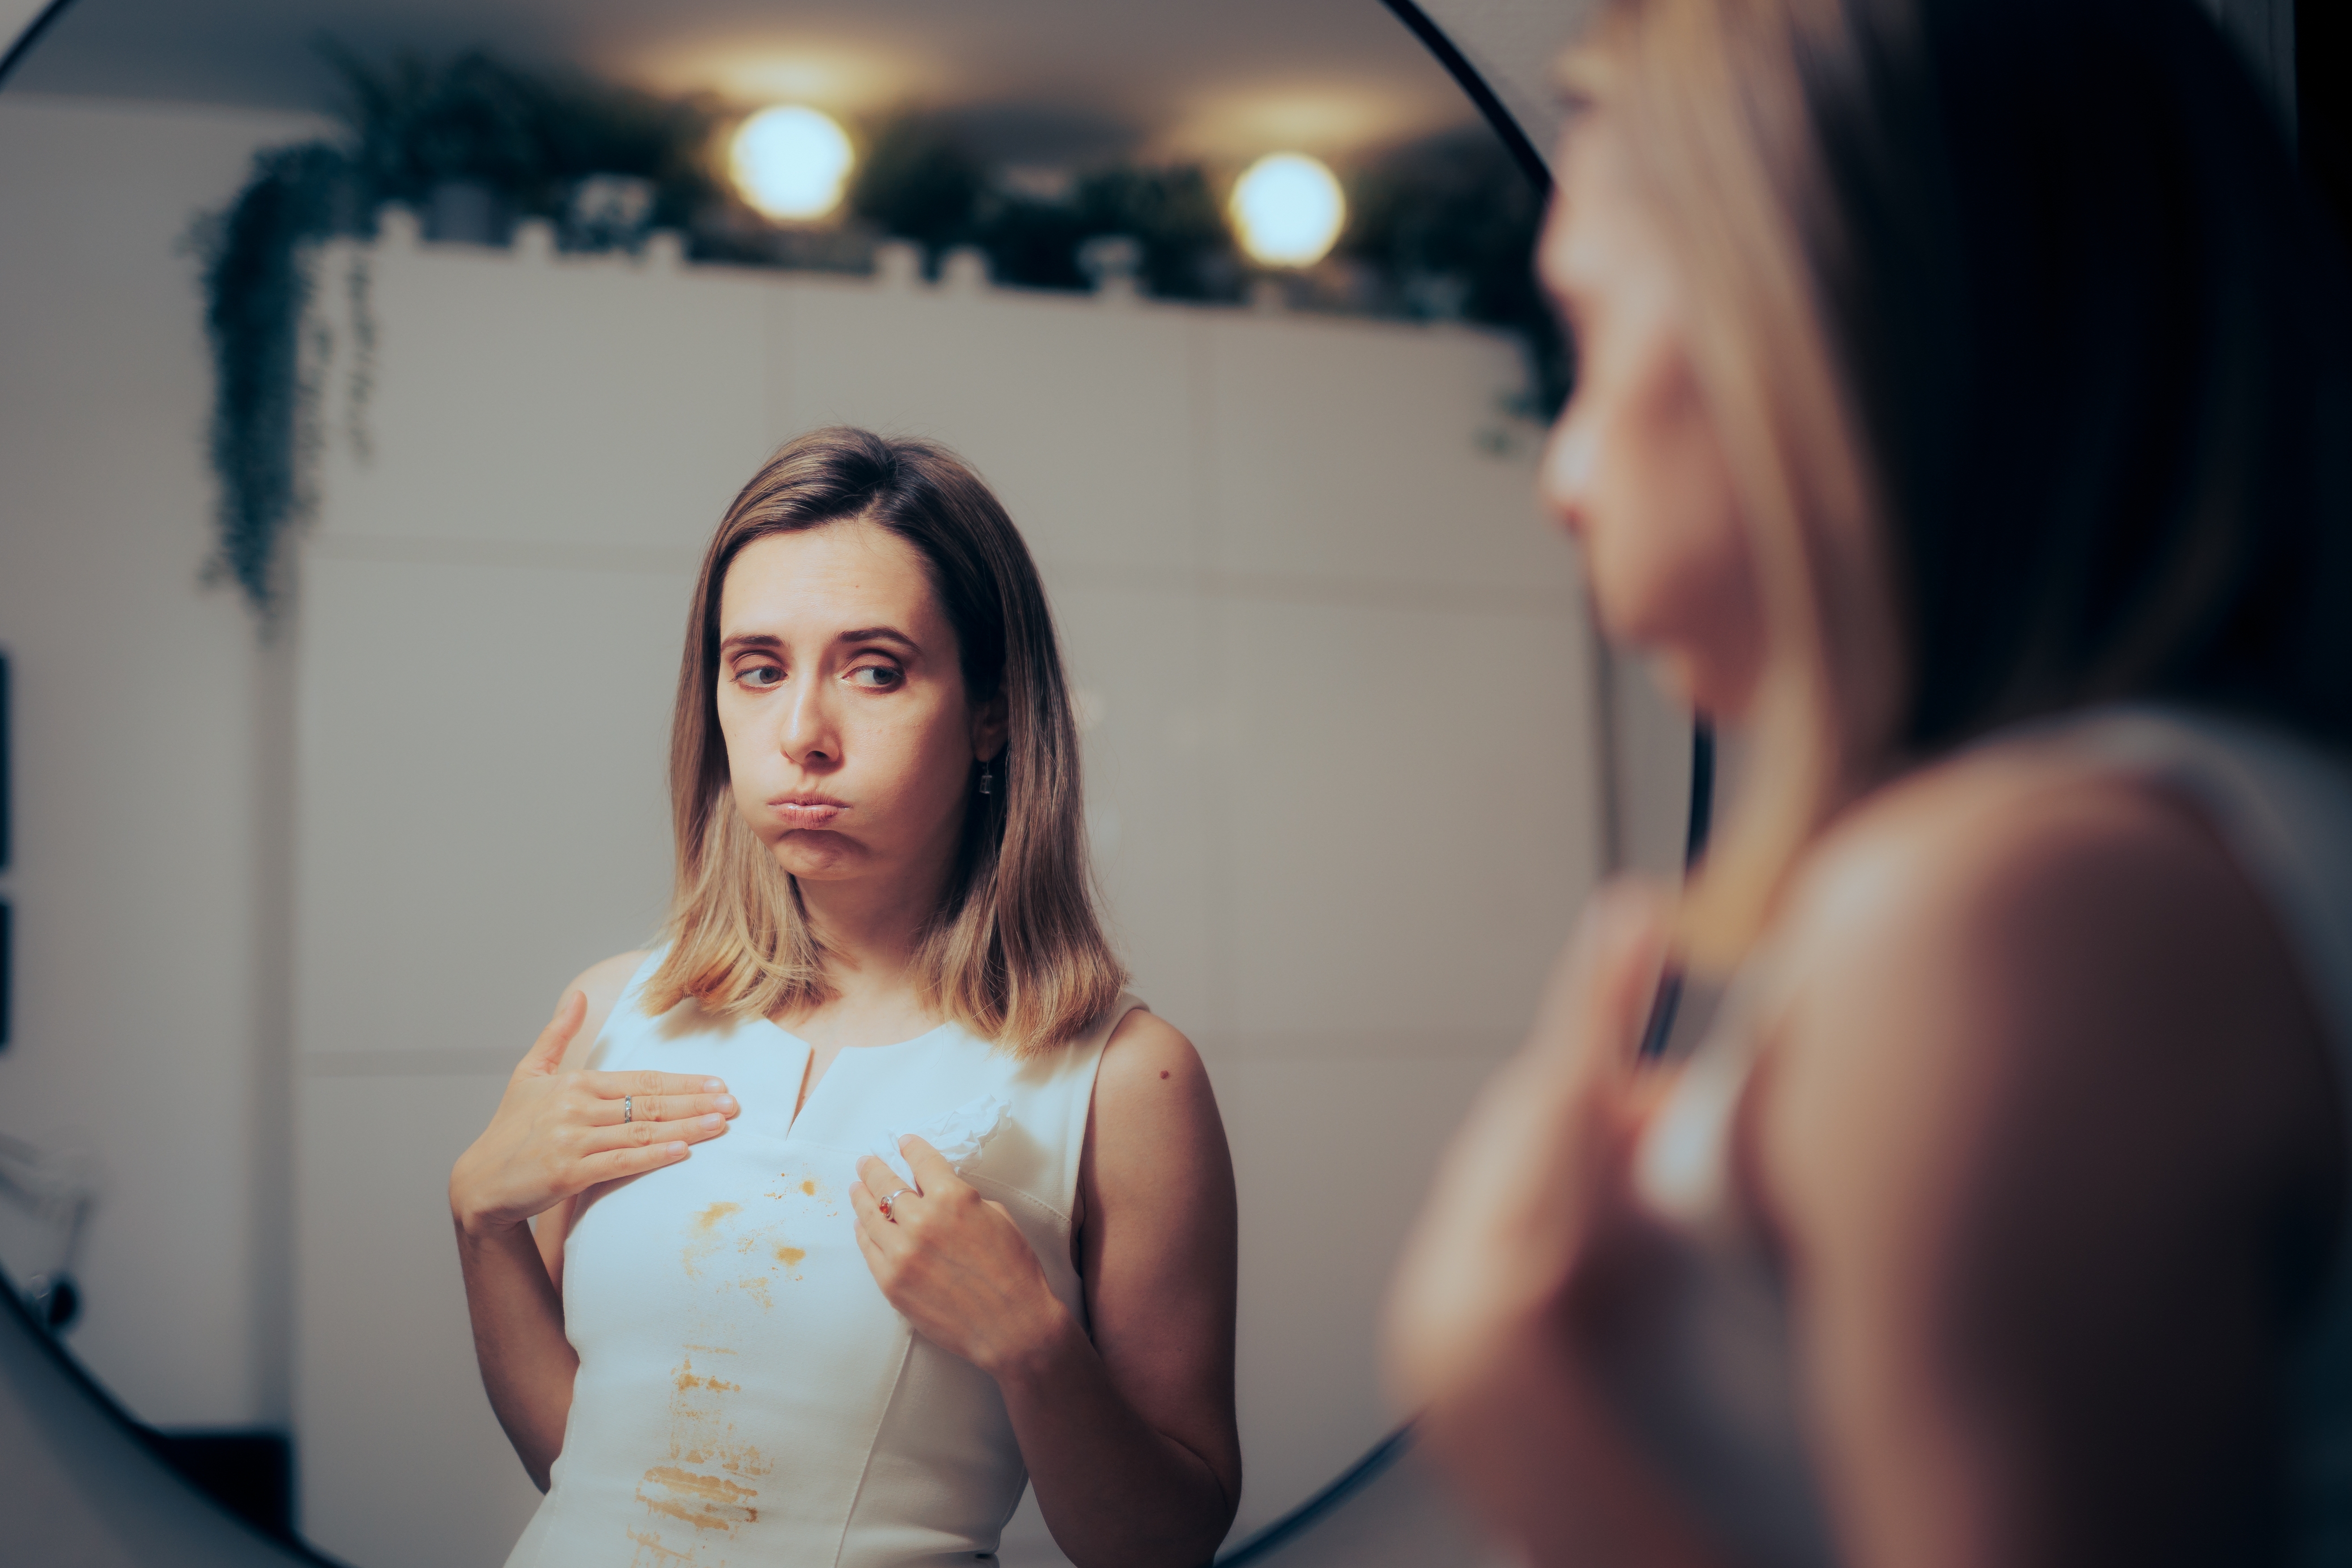 A woman looking at herself in the mirror and appearing unhappy | Source: Shutterstock